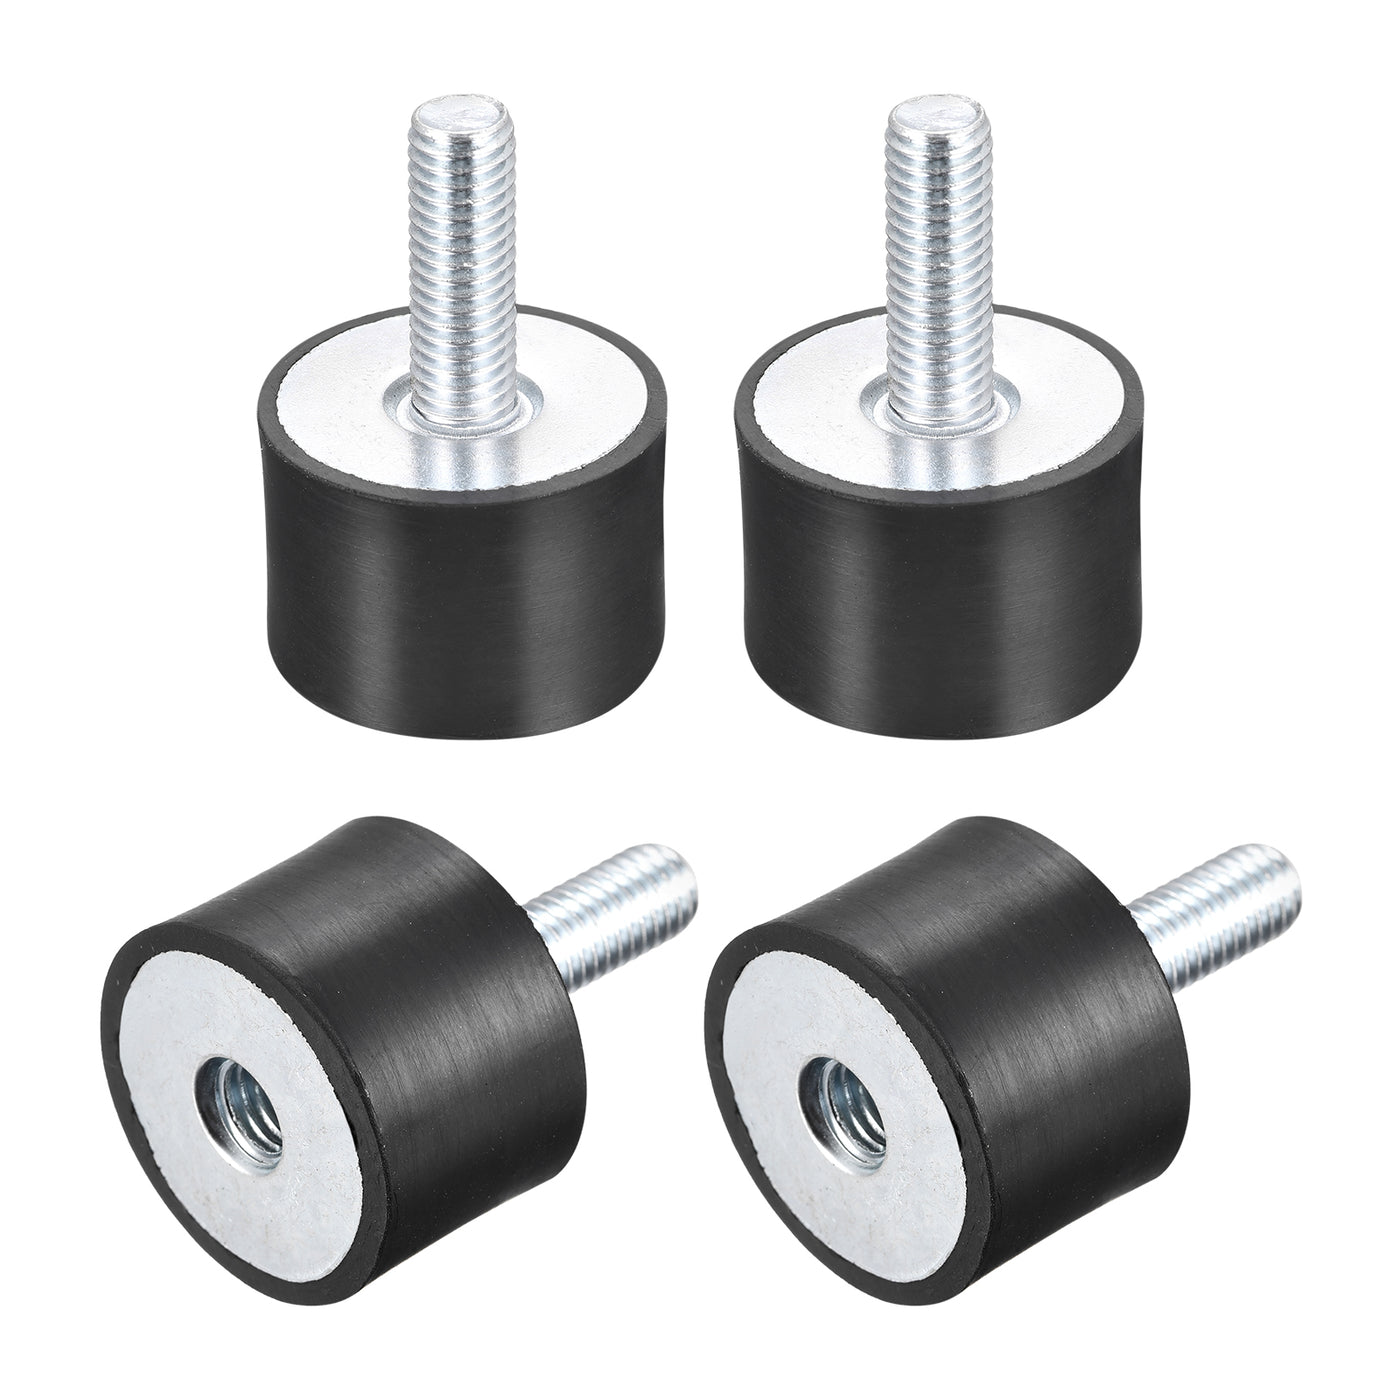 uxcell Uxcell Rubber Mounts 4pcs M8 Male/Female Vibration Isolator Shock Absorber D30mmxH20mm